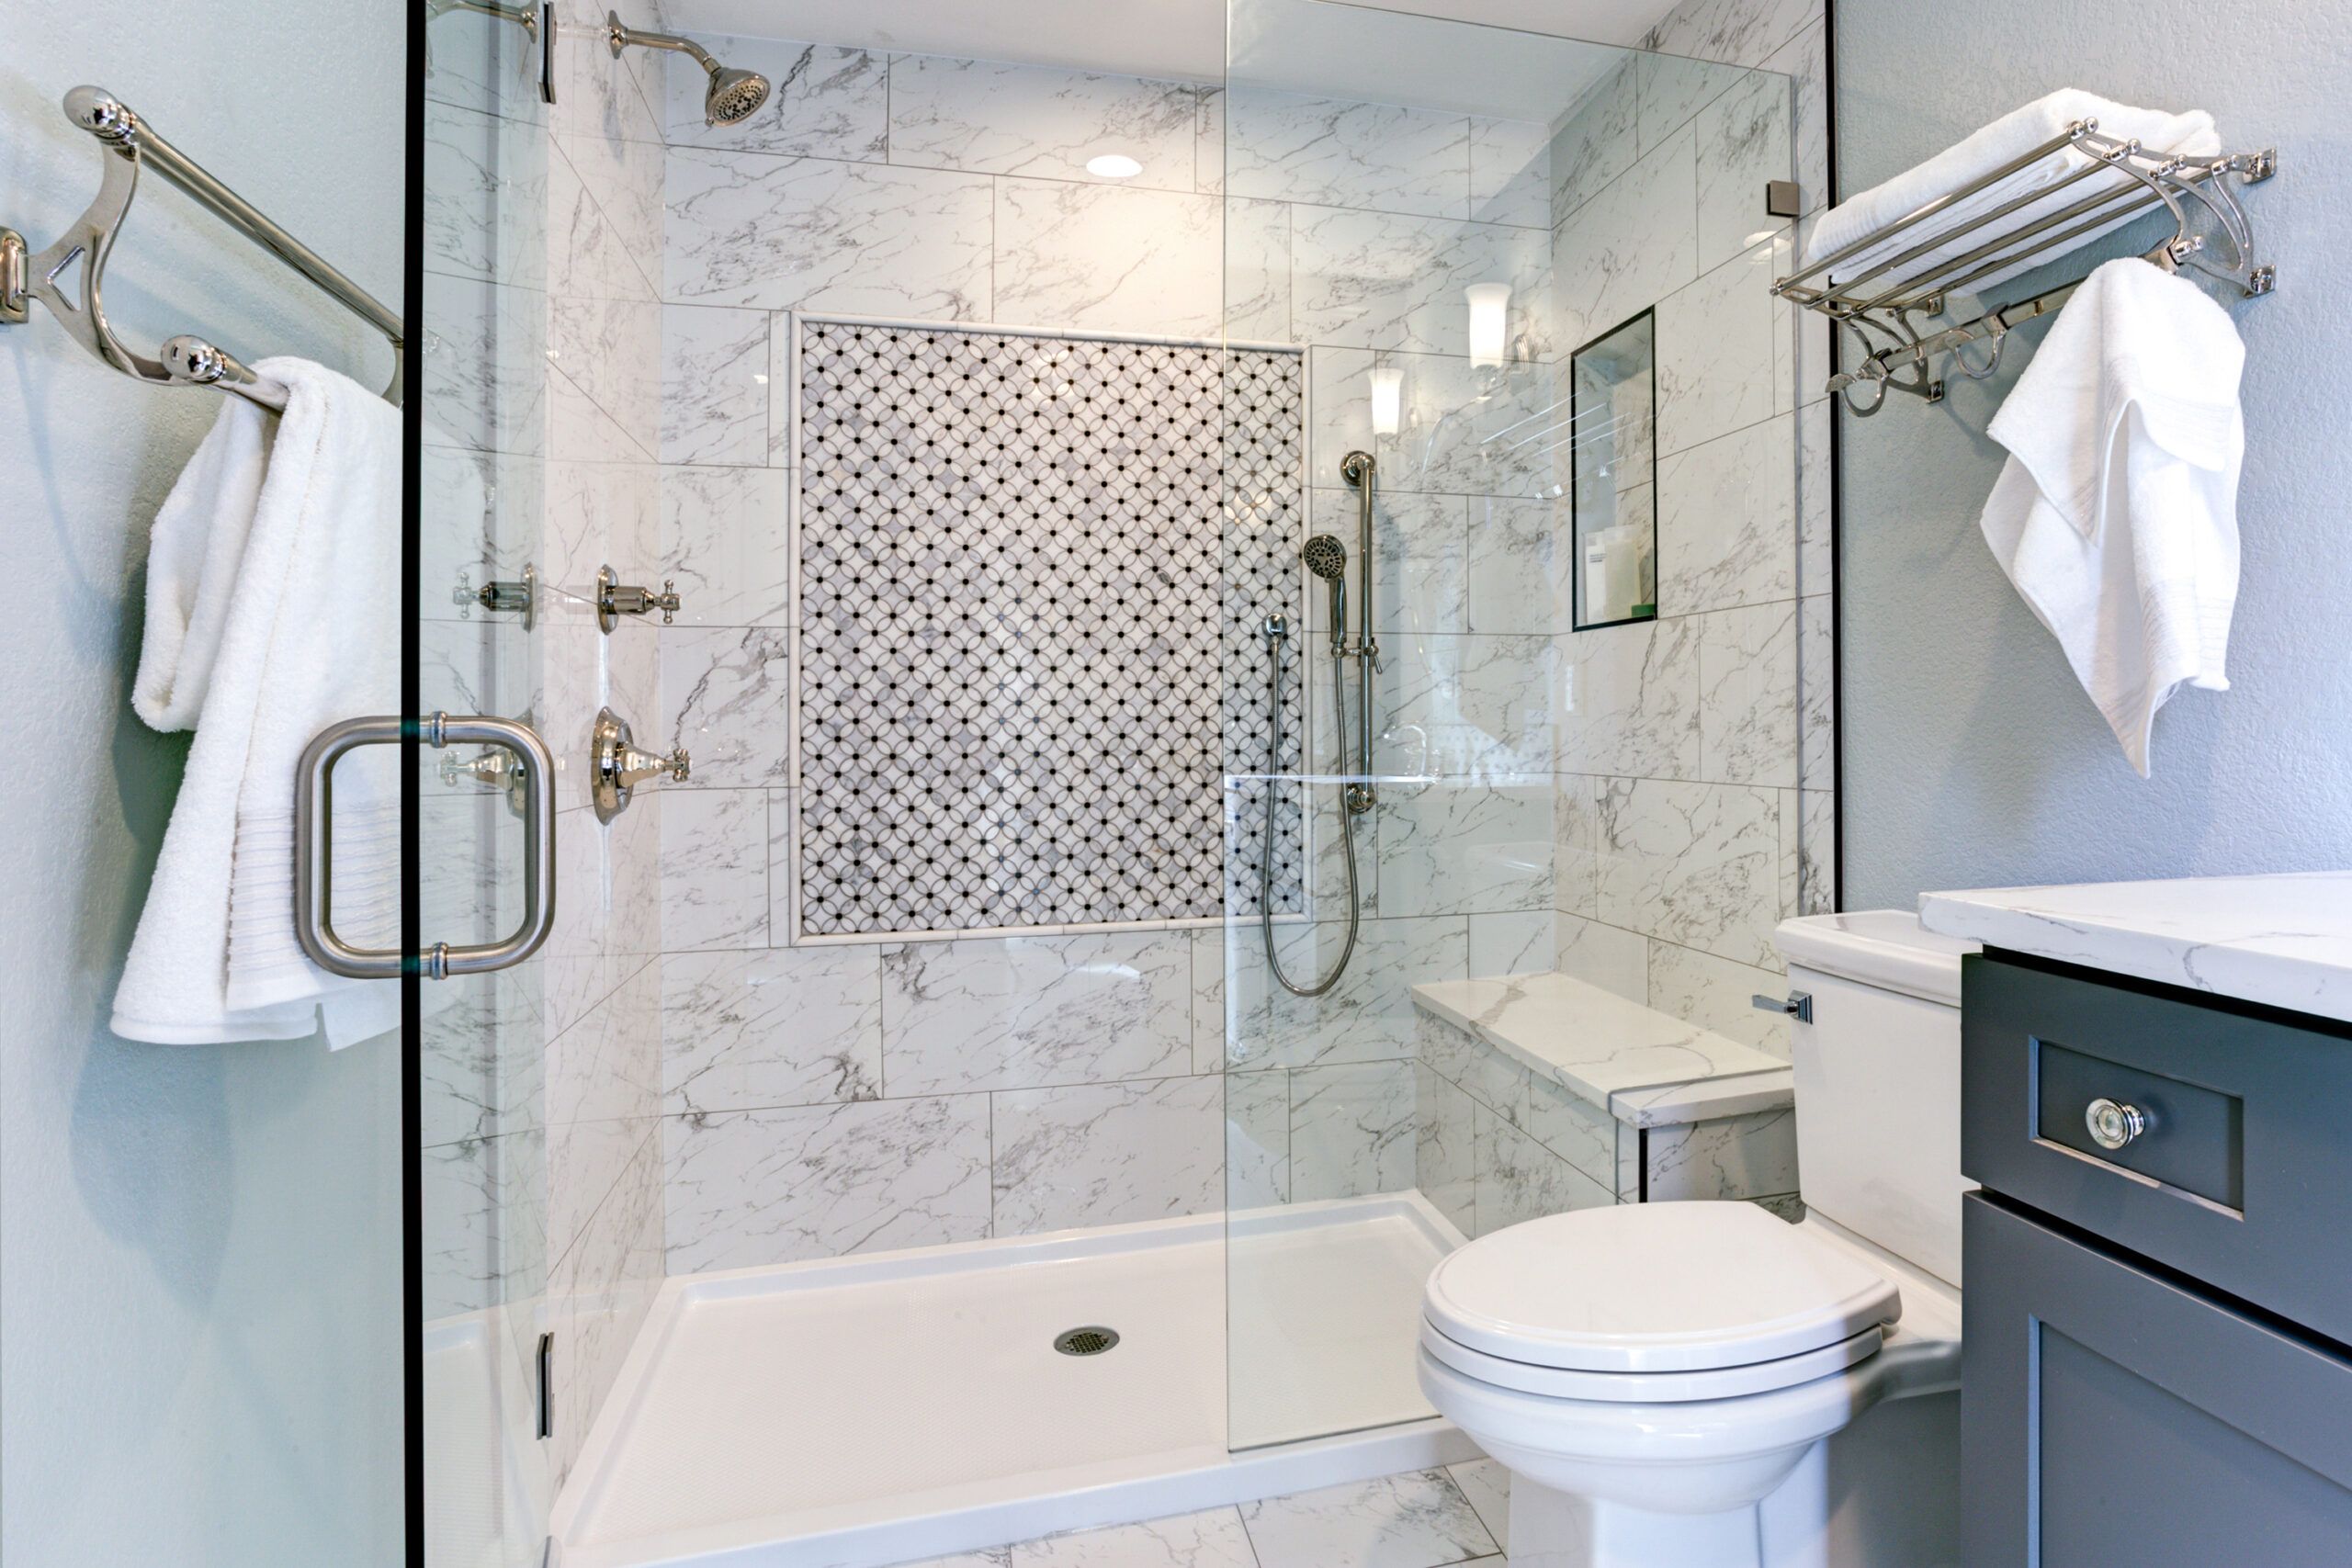 How To Plan Your Space For A Small Bathroom Remodel - This Old House